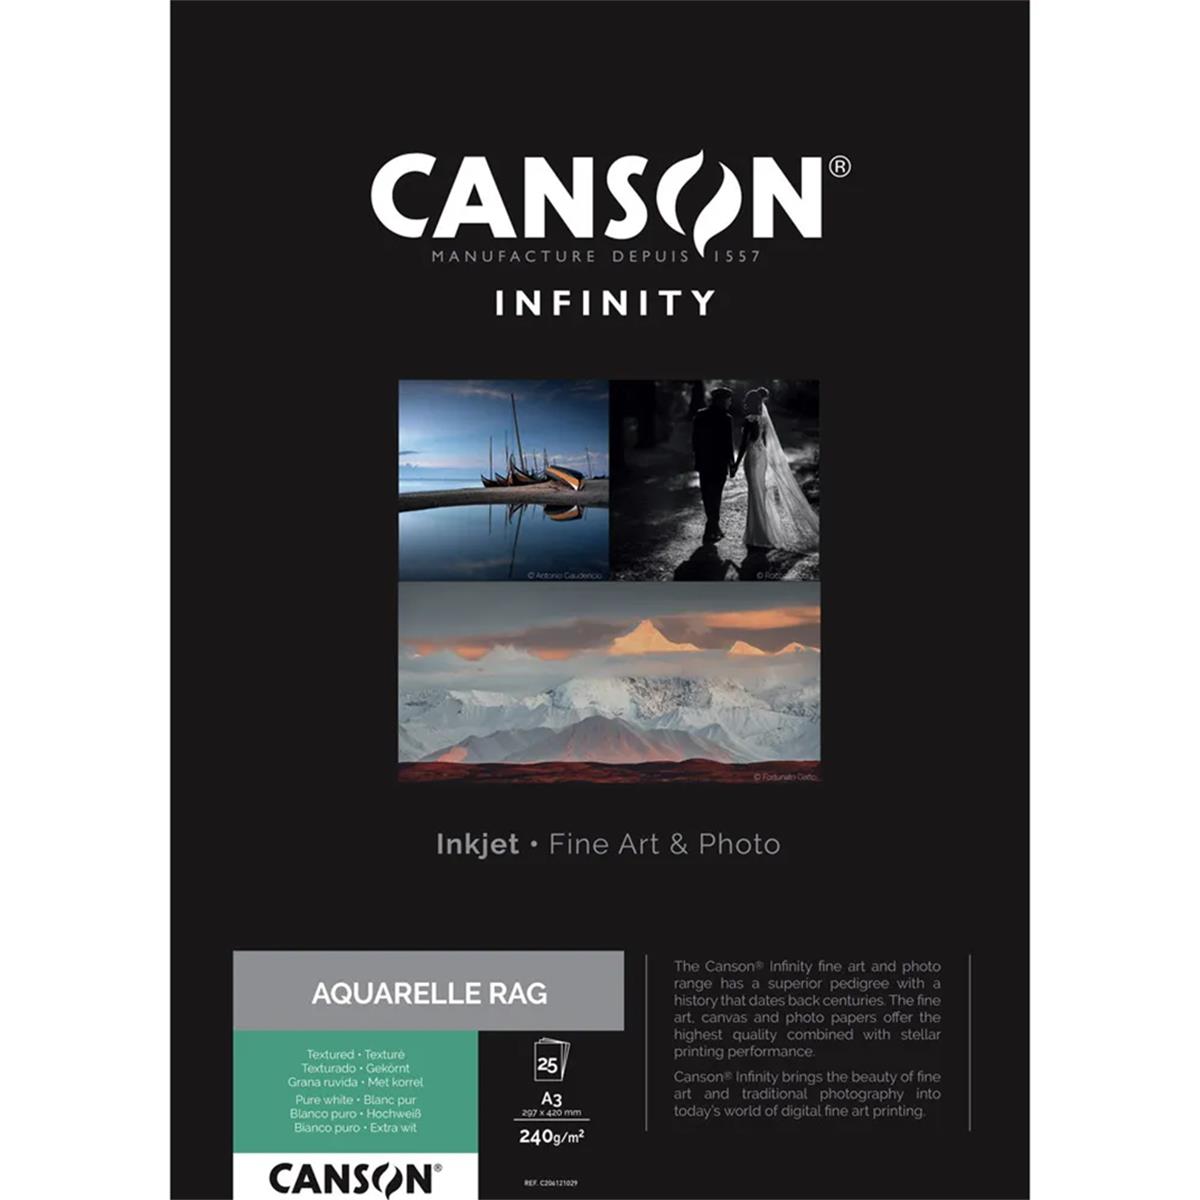 Image of Canson Infinity ARCHES Aquarelle Rag White Matte Inkjet Paper